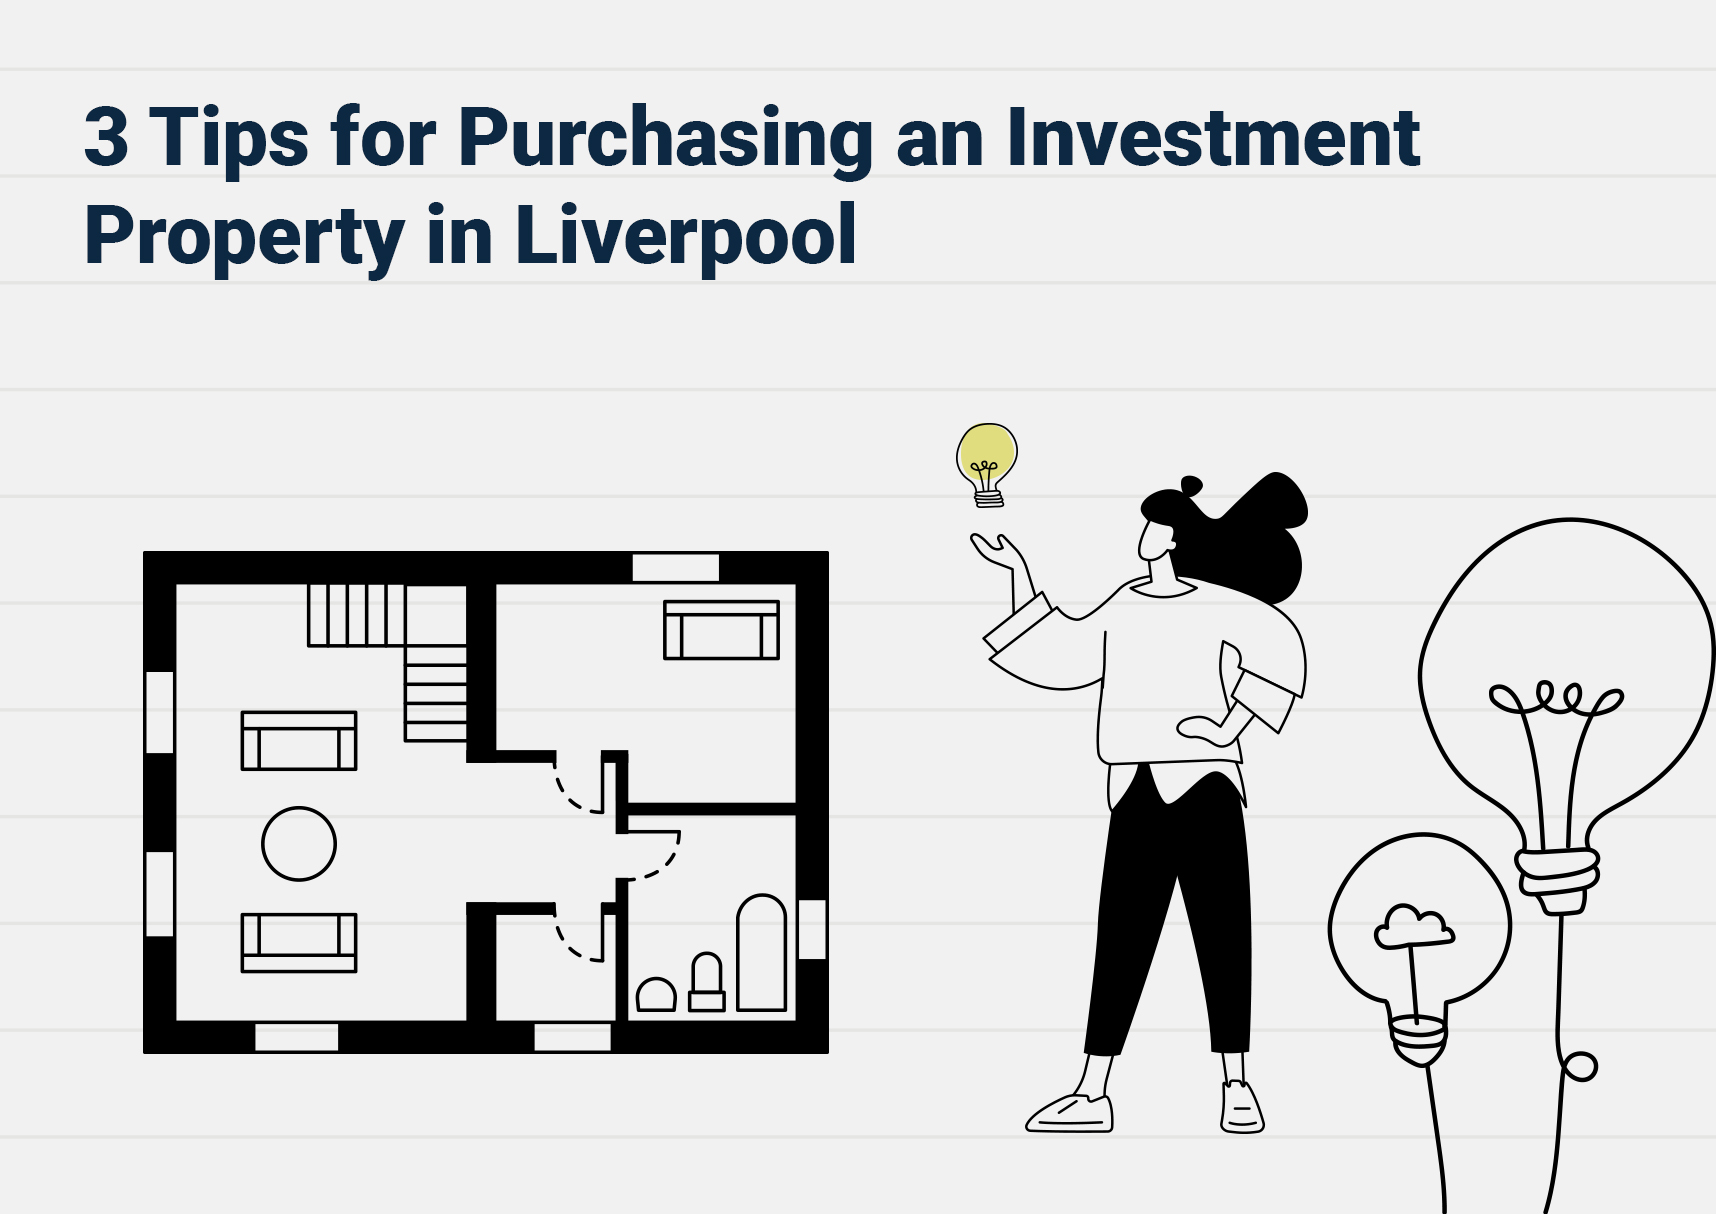 3 Tips for Purchasing an Investment Property in Liverpool